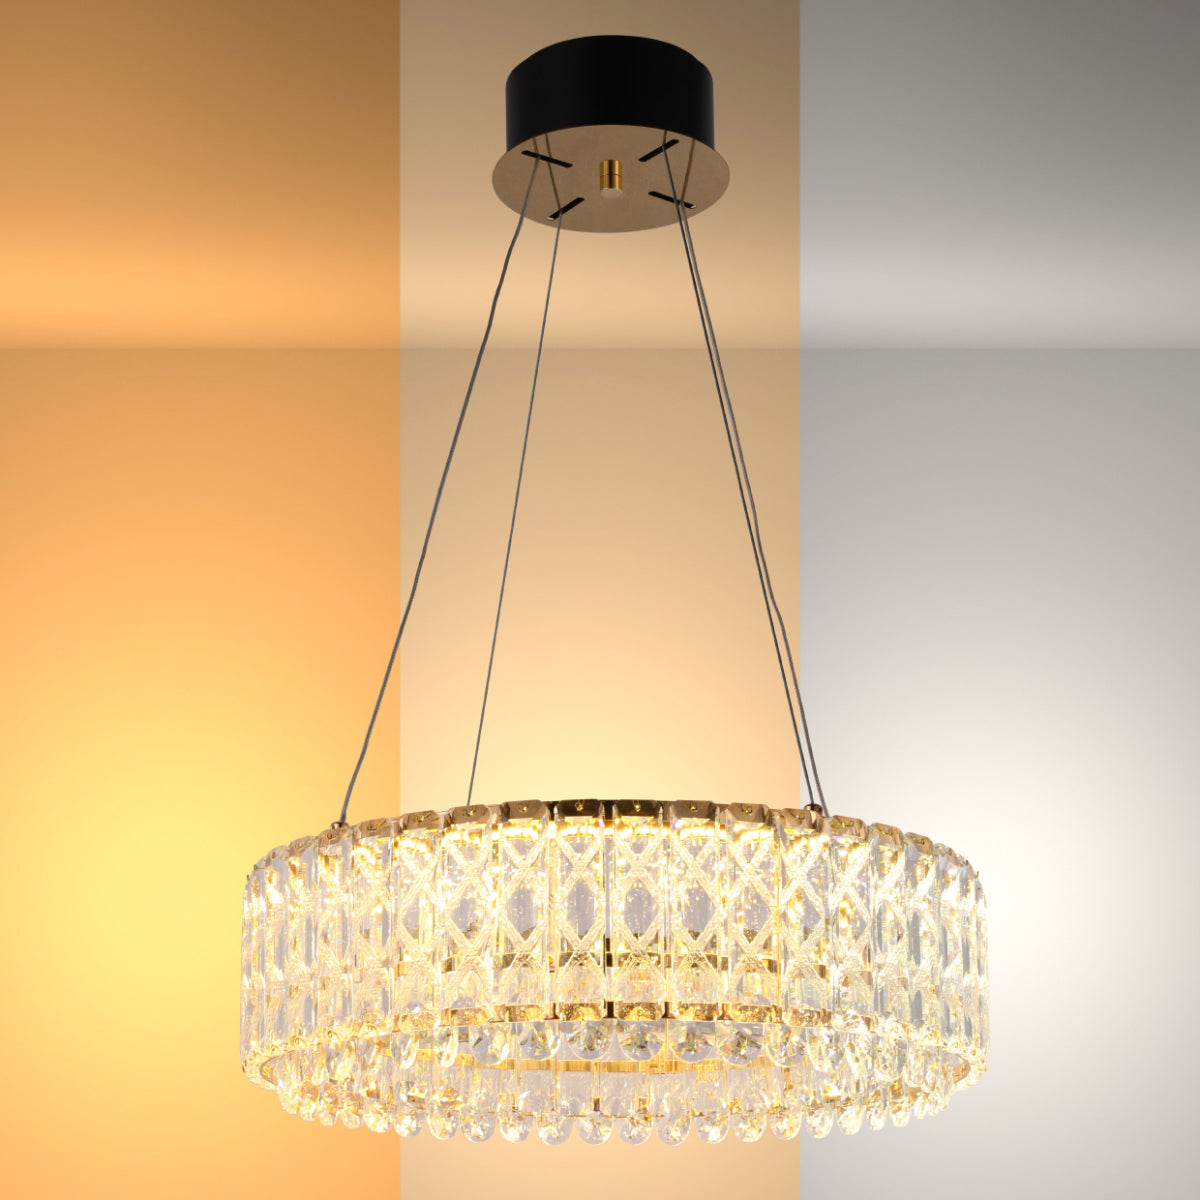 Main image of Crystal Gold Pendant Chandelier Light with Remote Control 159-18215